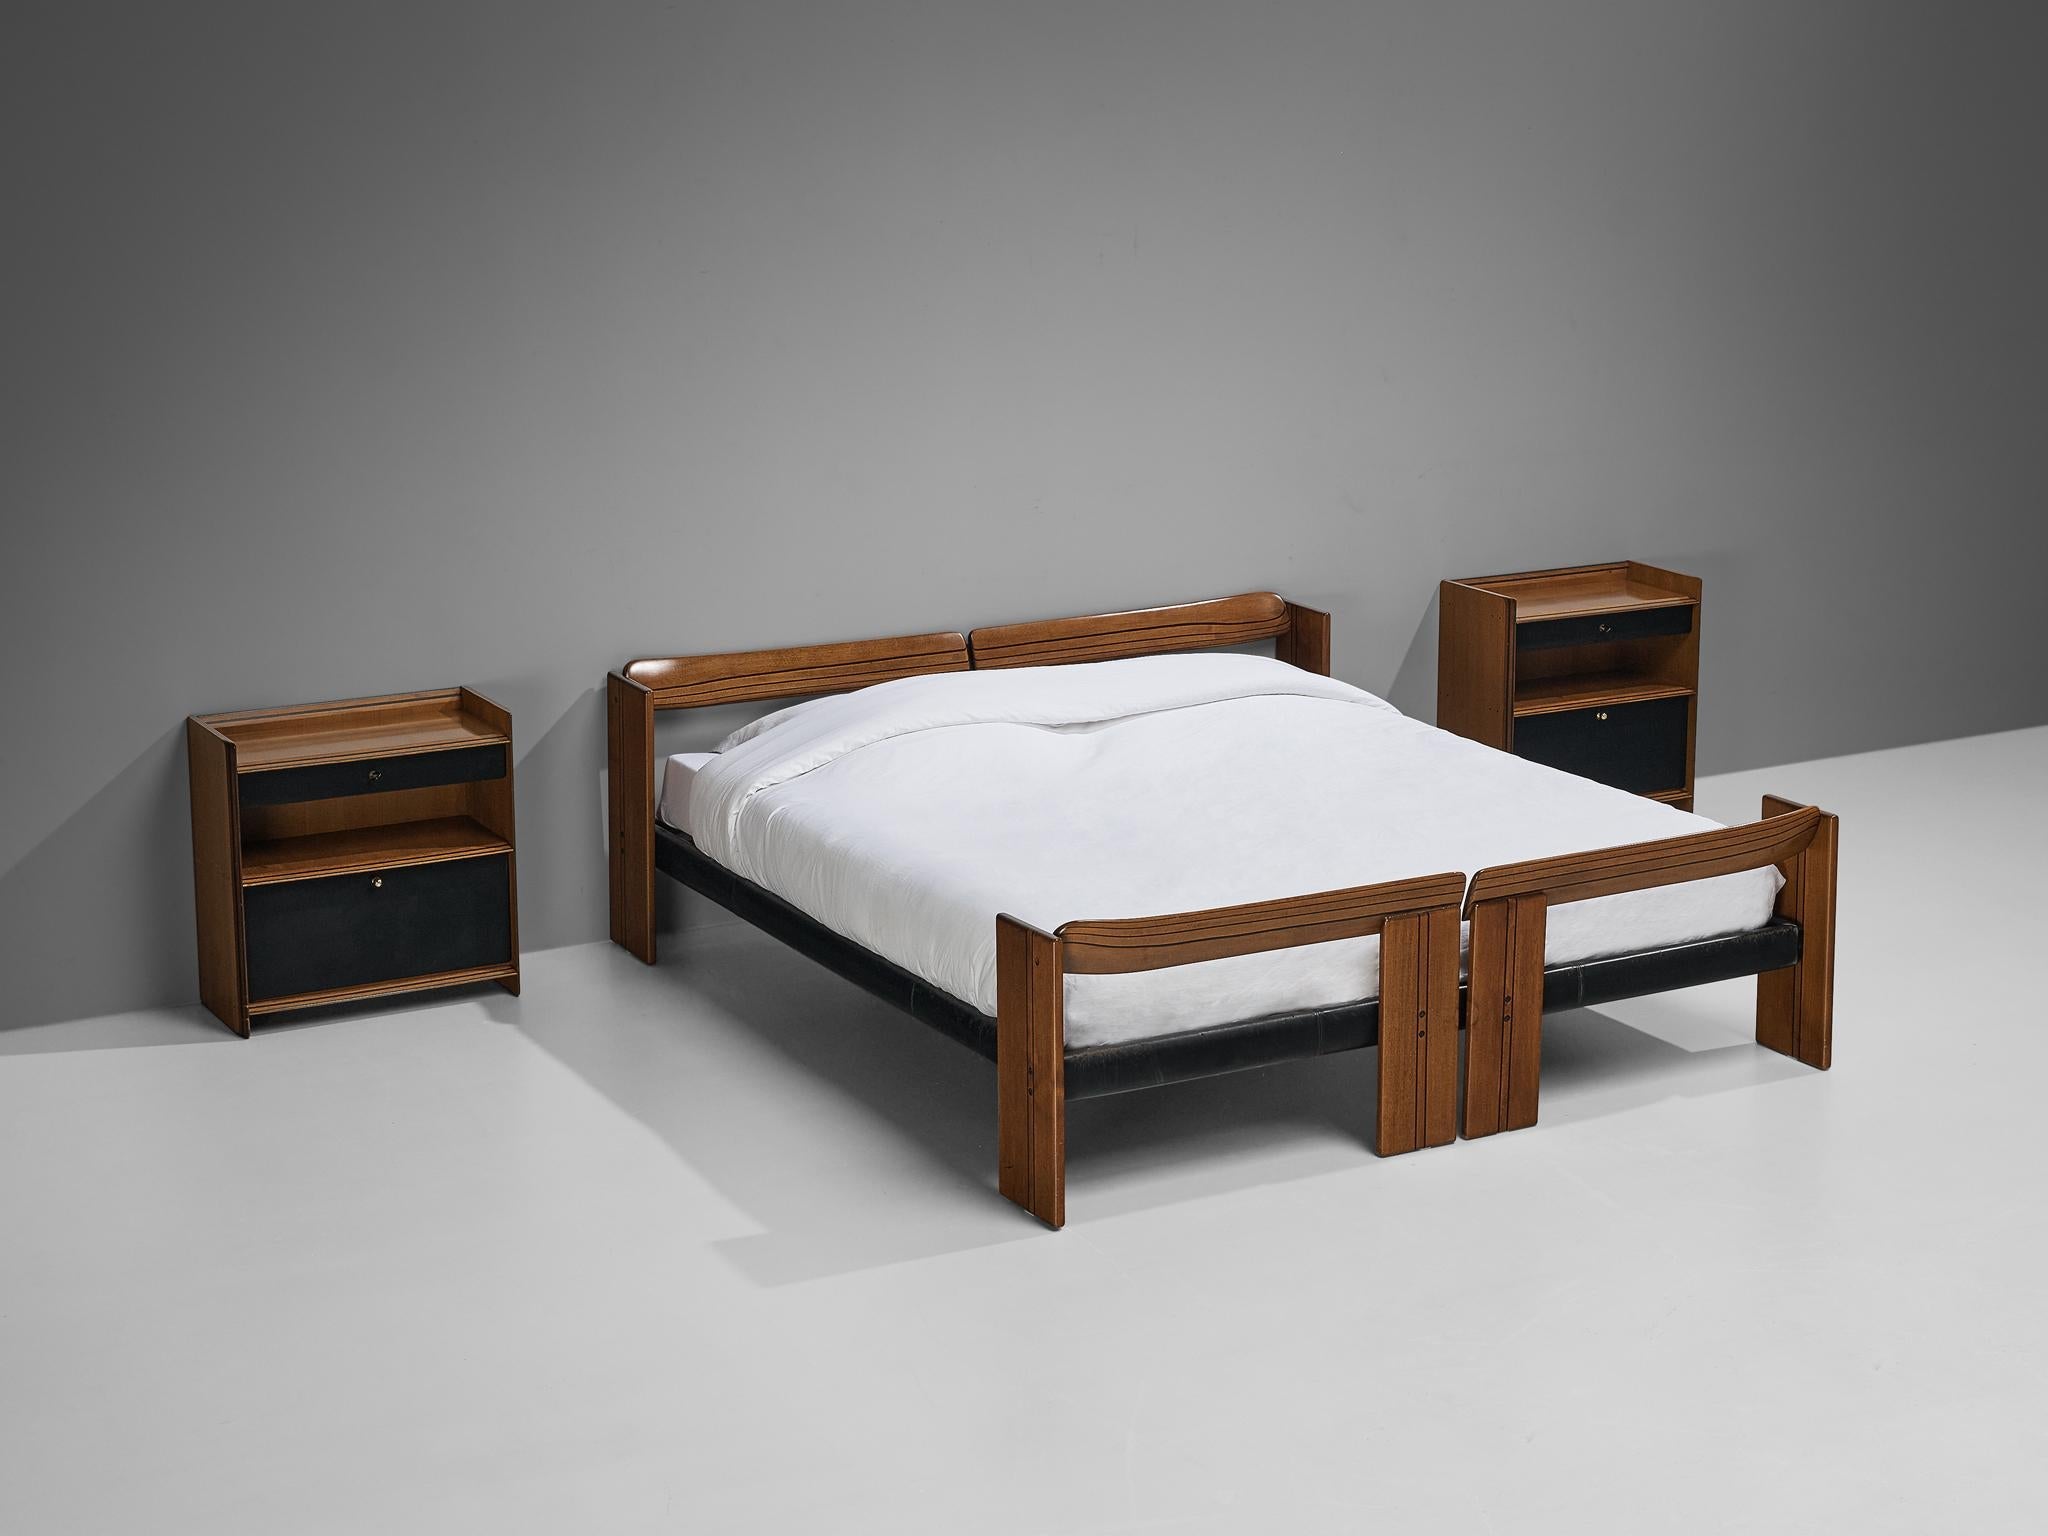 Afra & Tobia Scarpa for Maxalto Double Bed with Nightstands in Walnut